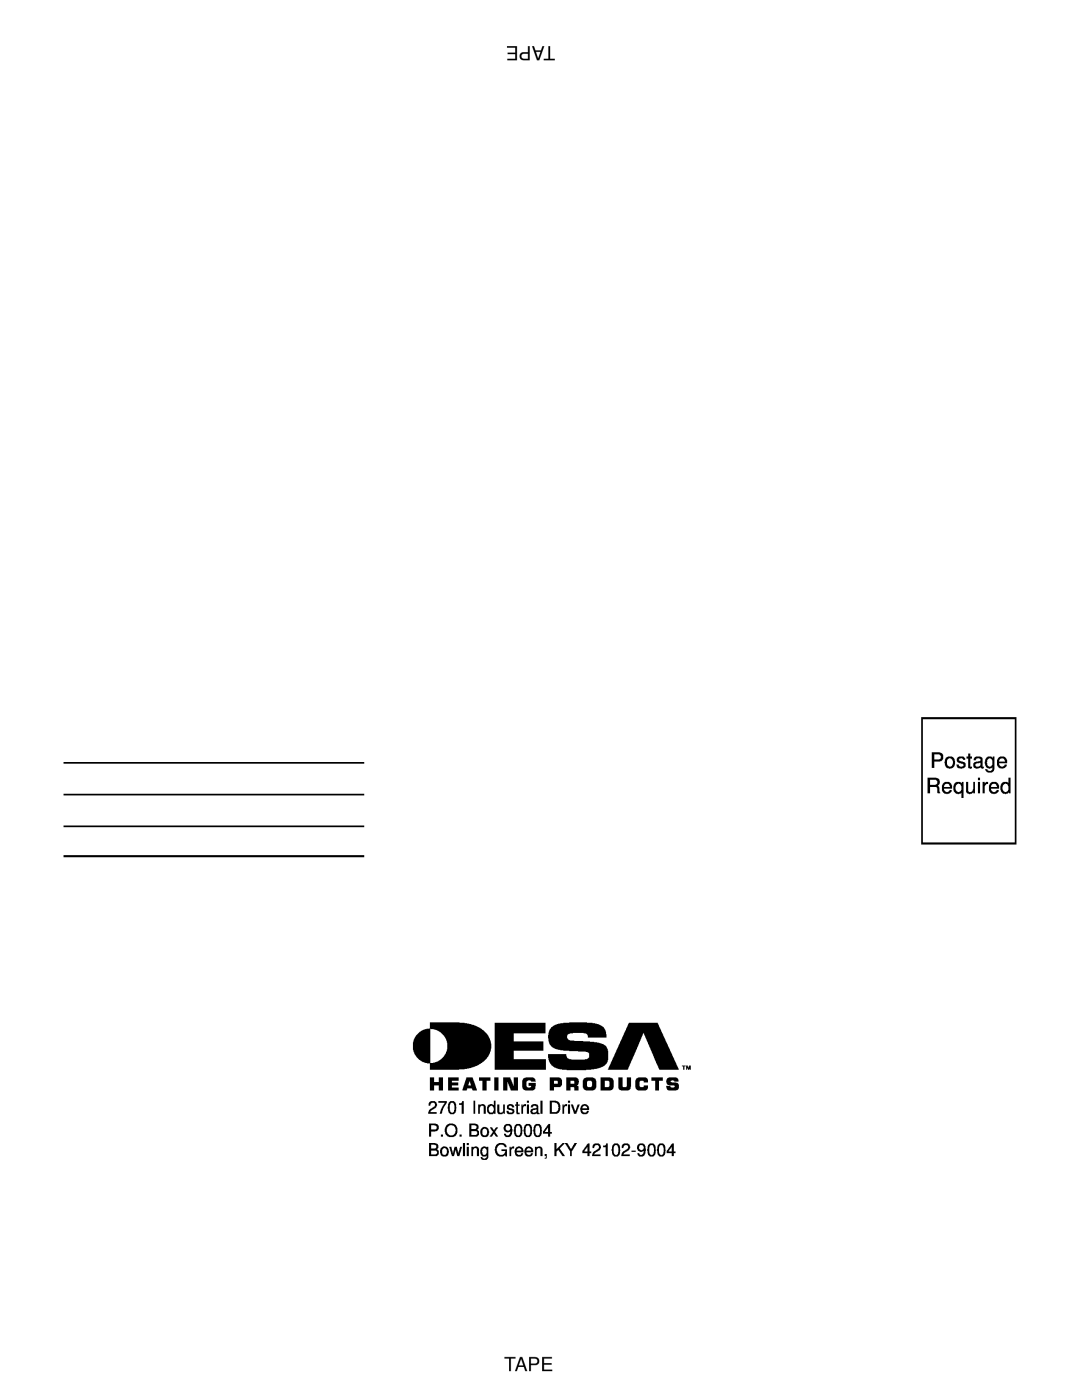 Desa 30, R, V, T installation manual Postage Required, Tape, Industrial Drive P.O. Box Bowling Green, KY 